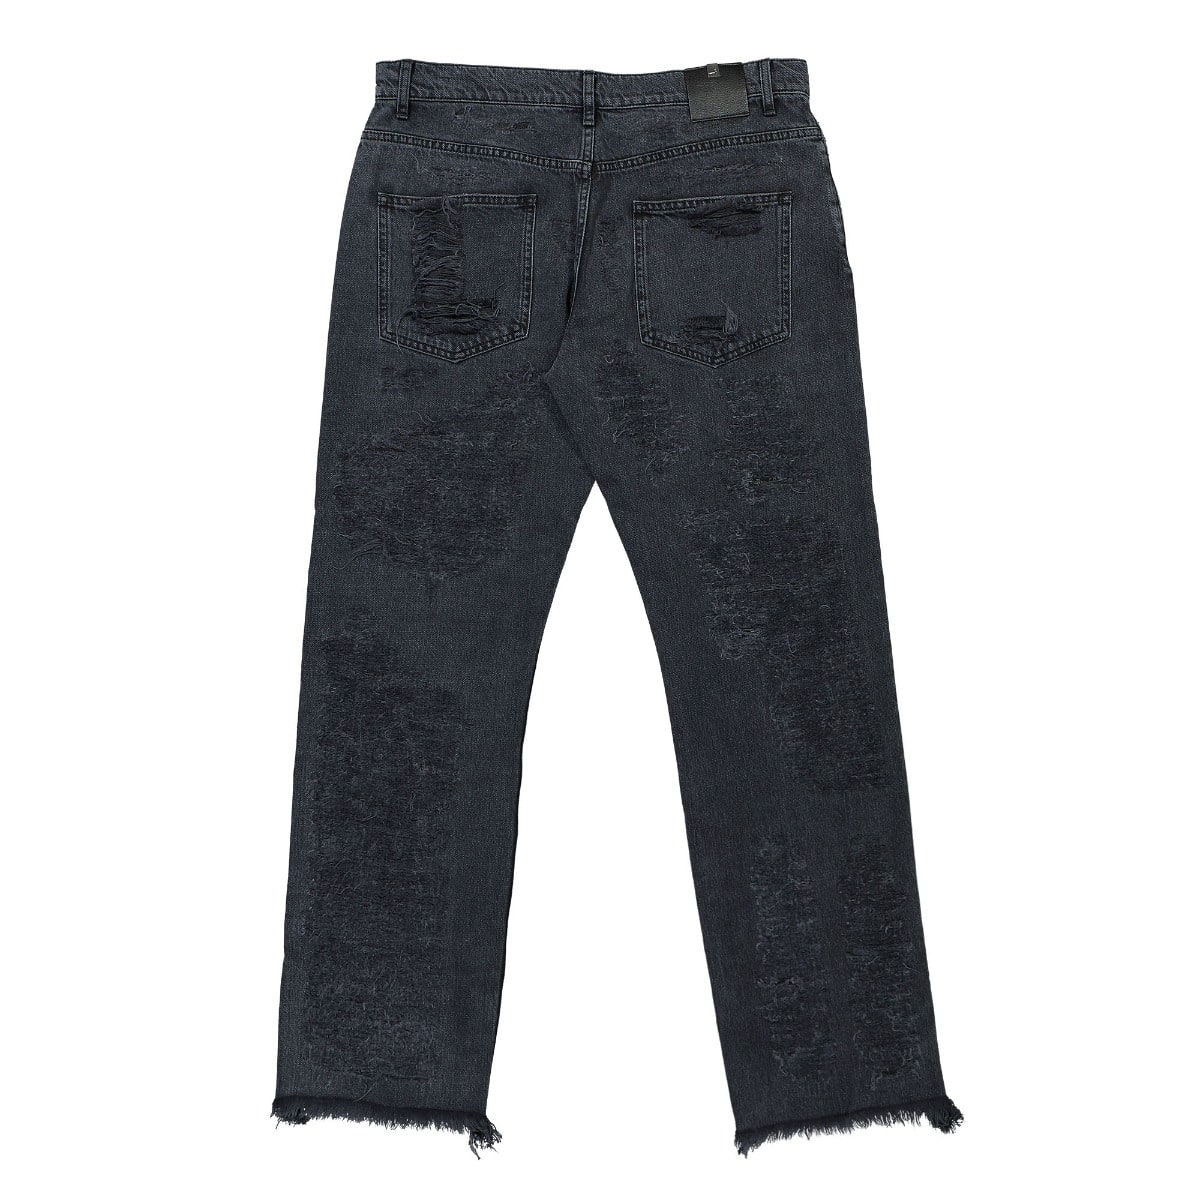 Destroyed Embroidery Jean